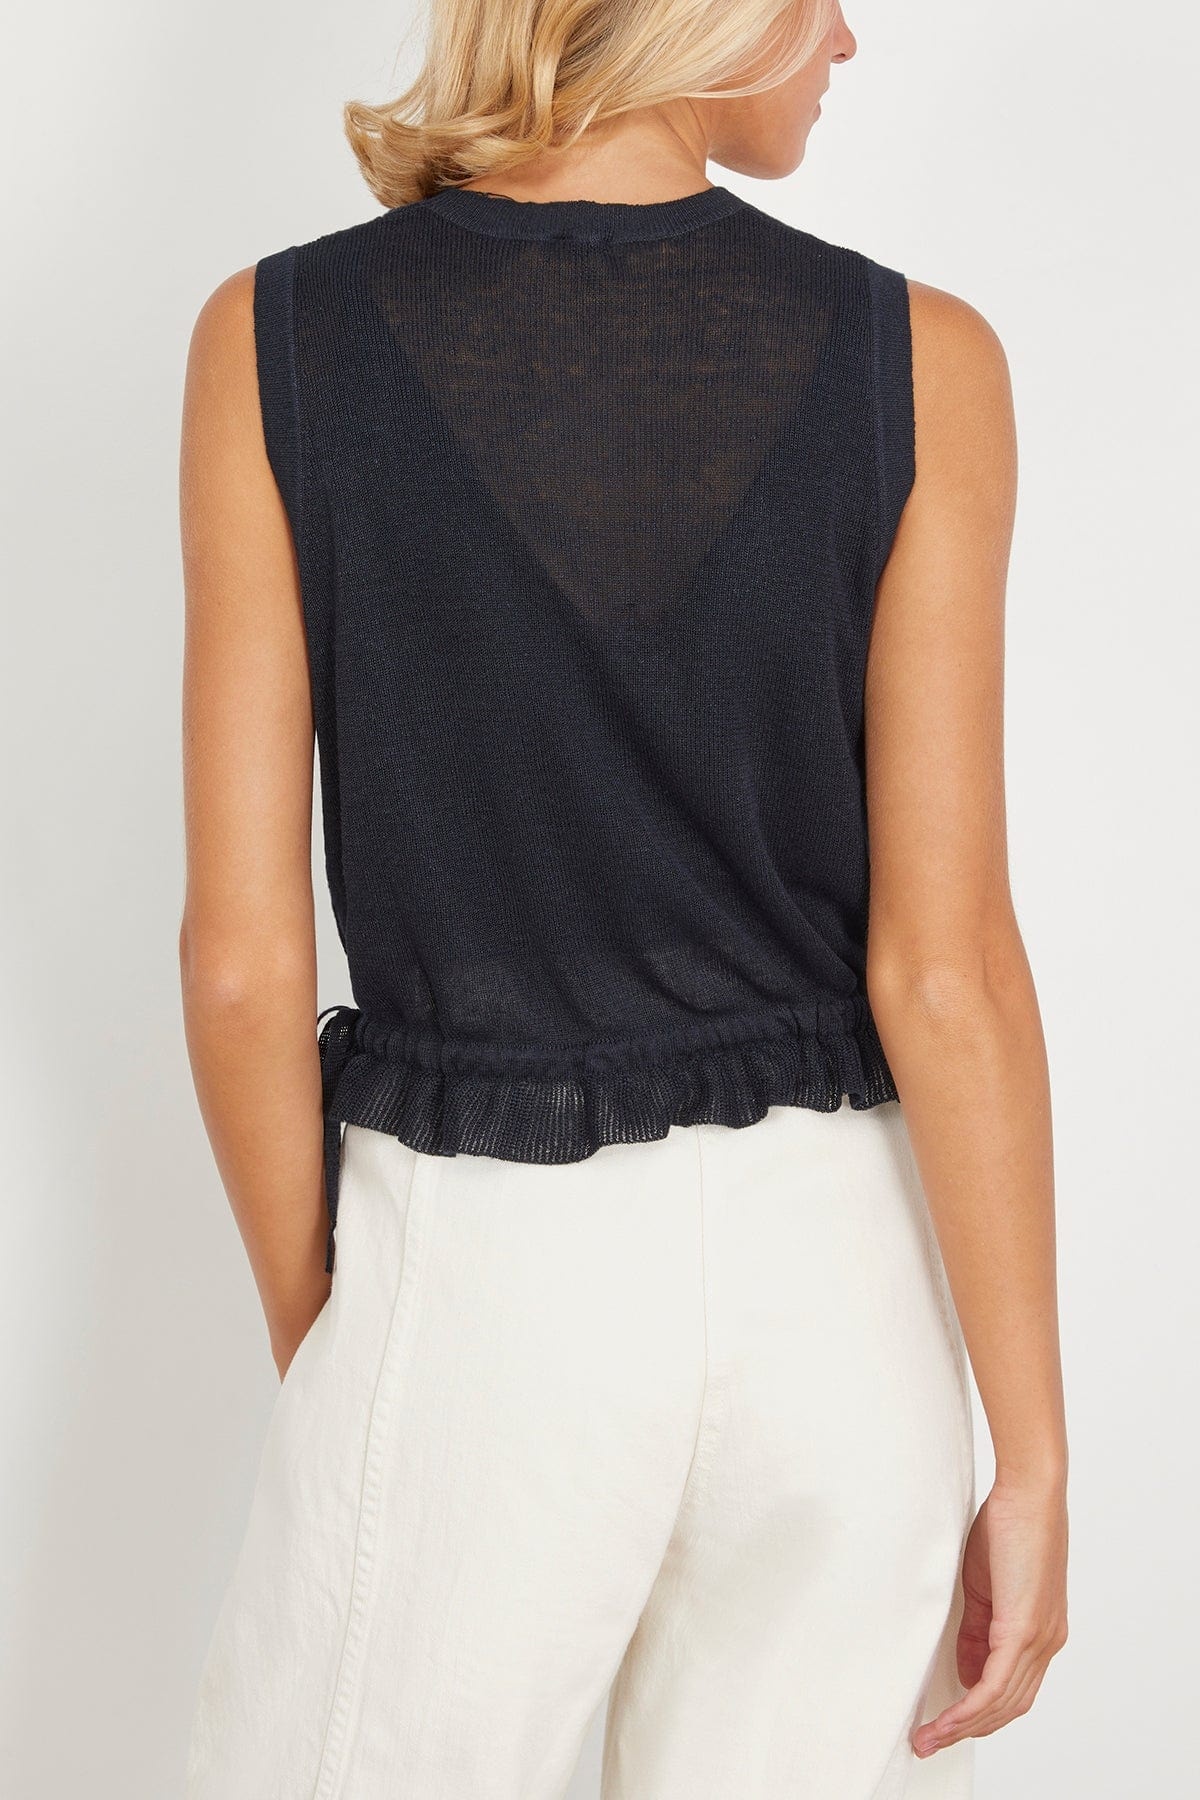 New Aires Top in Black - 4